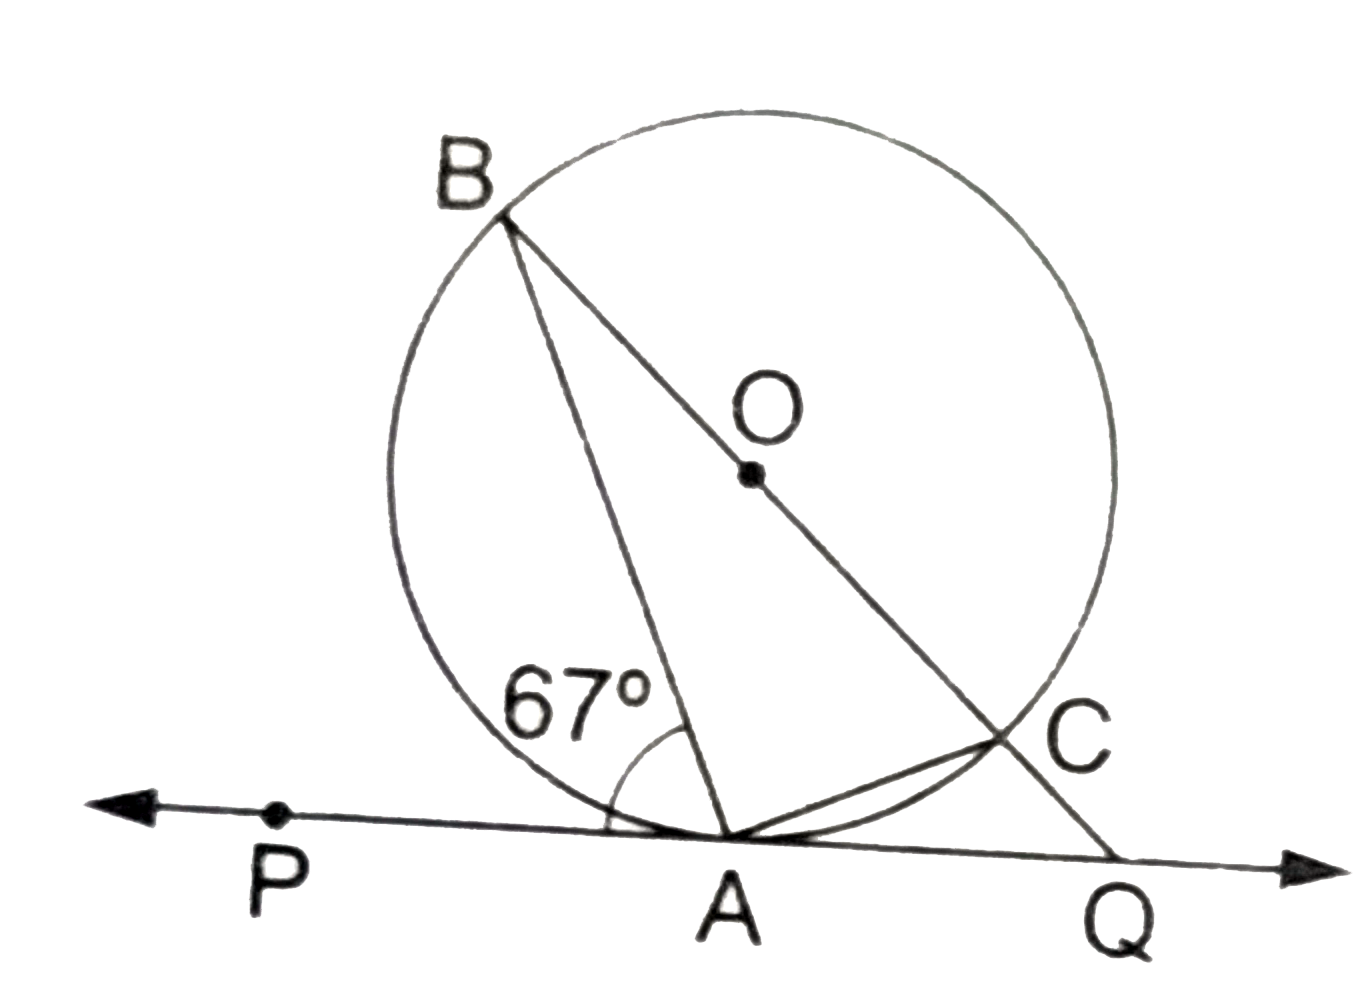 In the given figure, PQ is a tangent to a circle with centre O. A is the point of contact. If /PAB=67^(@), then the measure of /AQB is